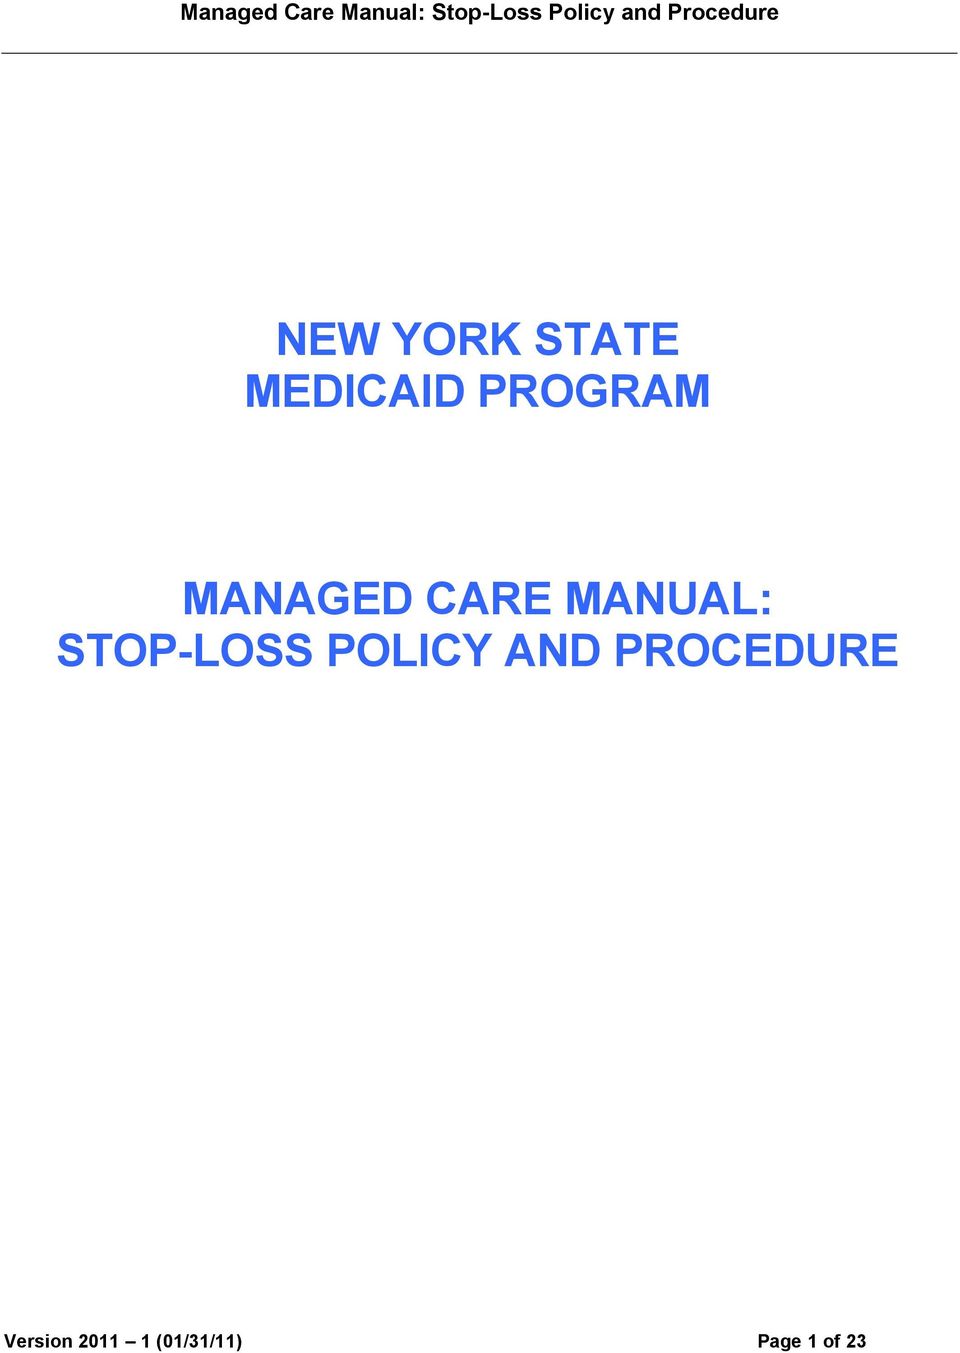 STOP-LOSS POLICY AND PROCEDURE